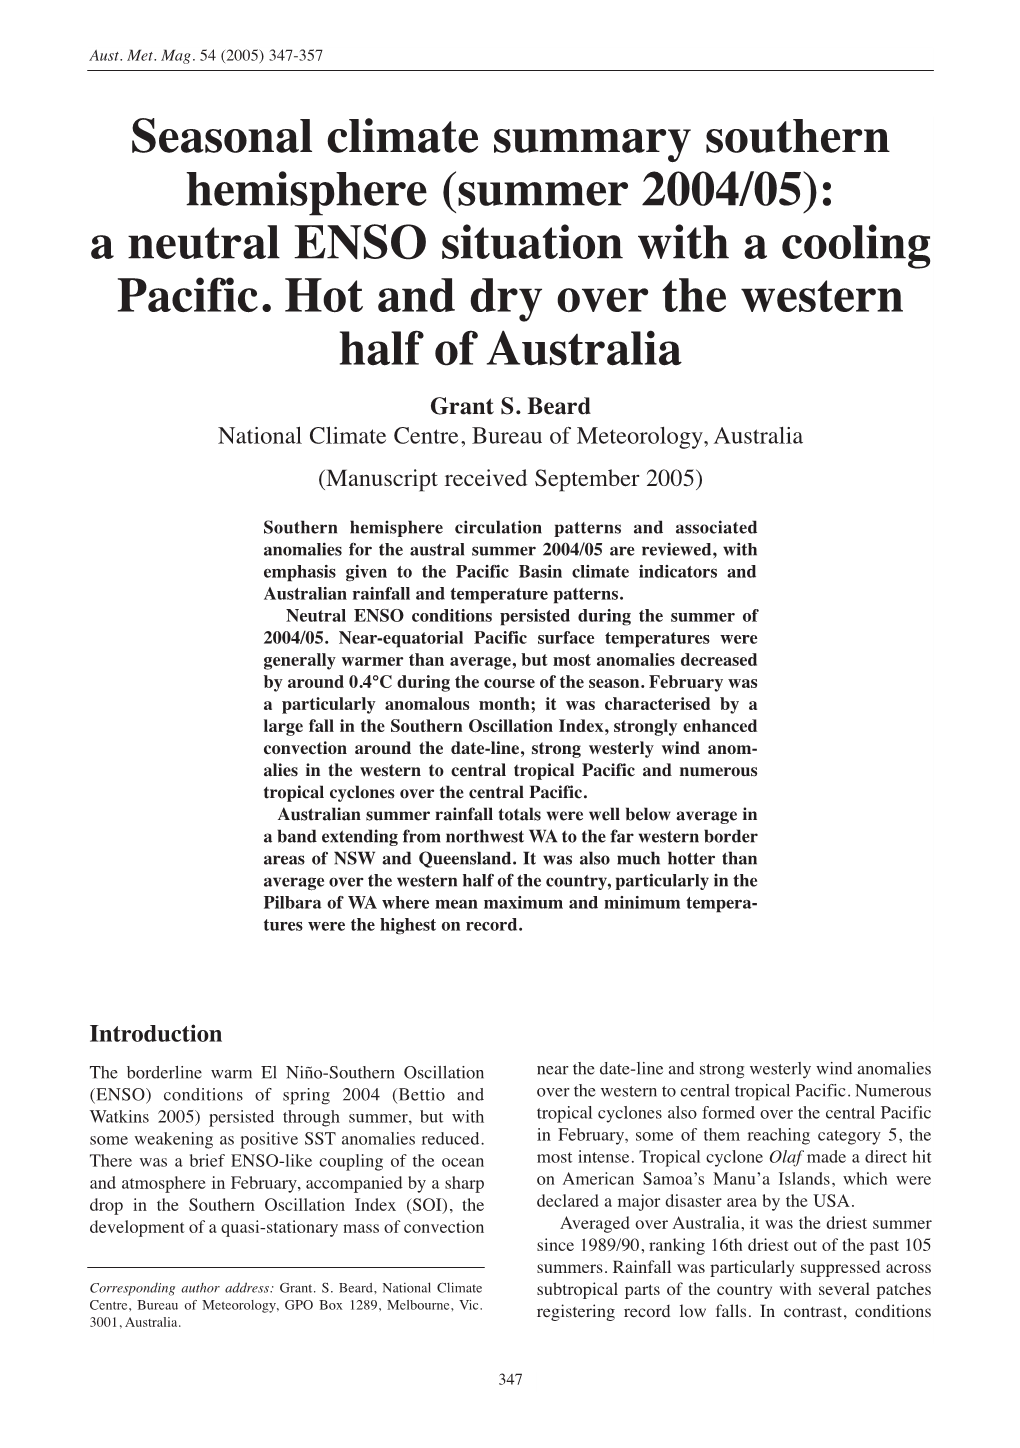 Seasonal Climate Summary Southern Hemisphere (Summer 2004/05): a Neutral ENSO Situation with a Cooling Pacific